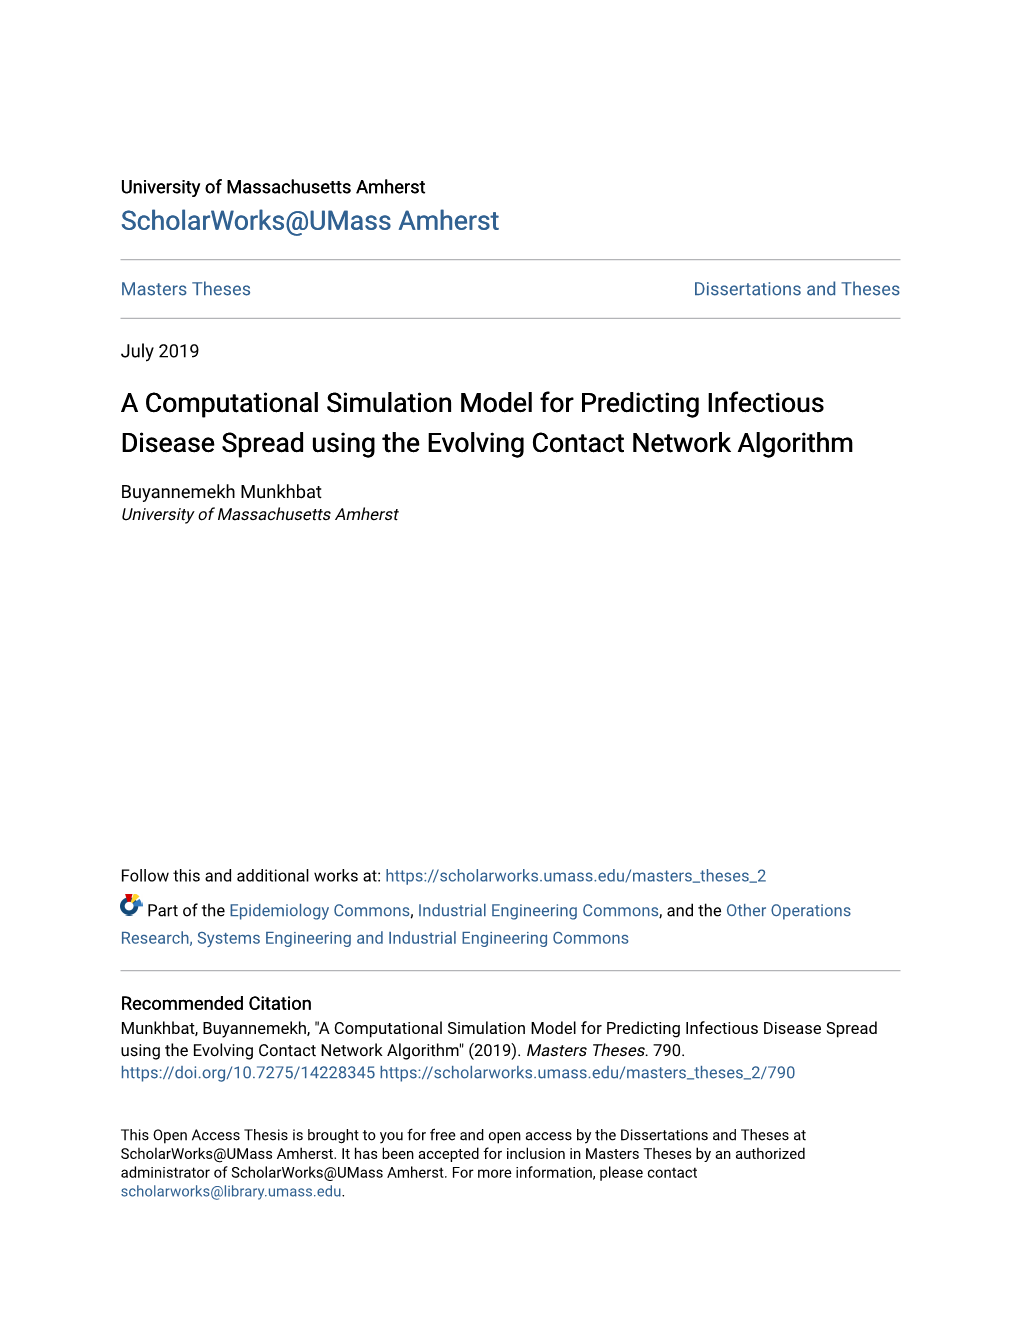 A Computational Simulation Model for Predicting Infectious Disease Spread Using the Evolving Contact Network Algorithm